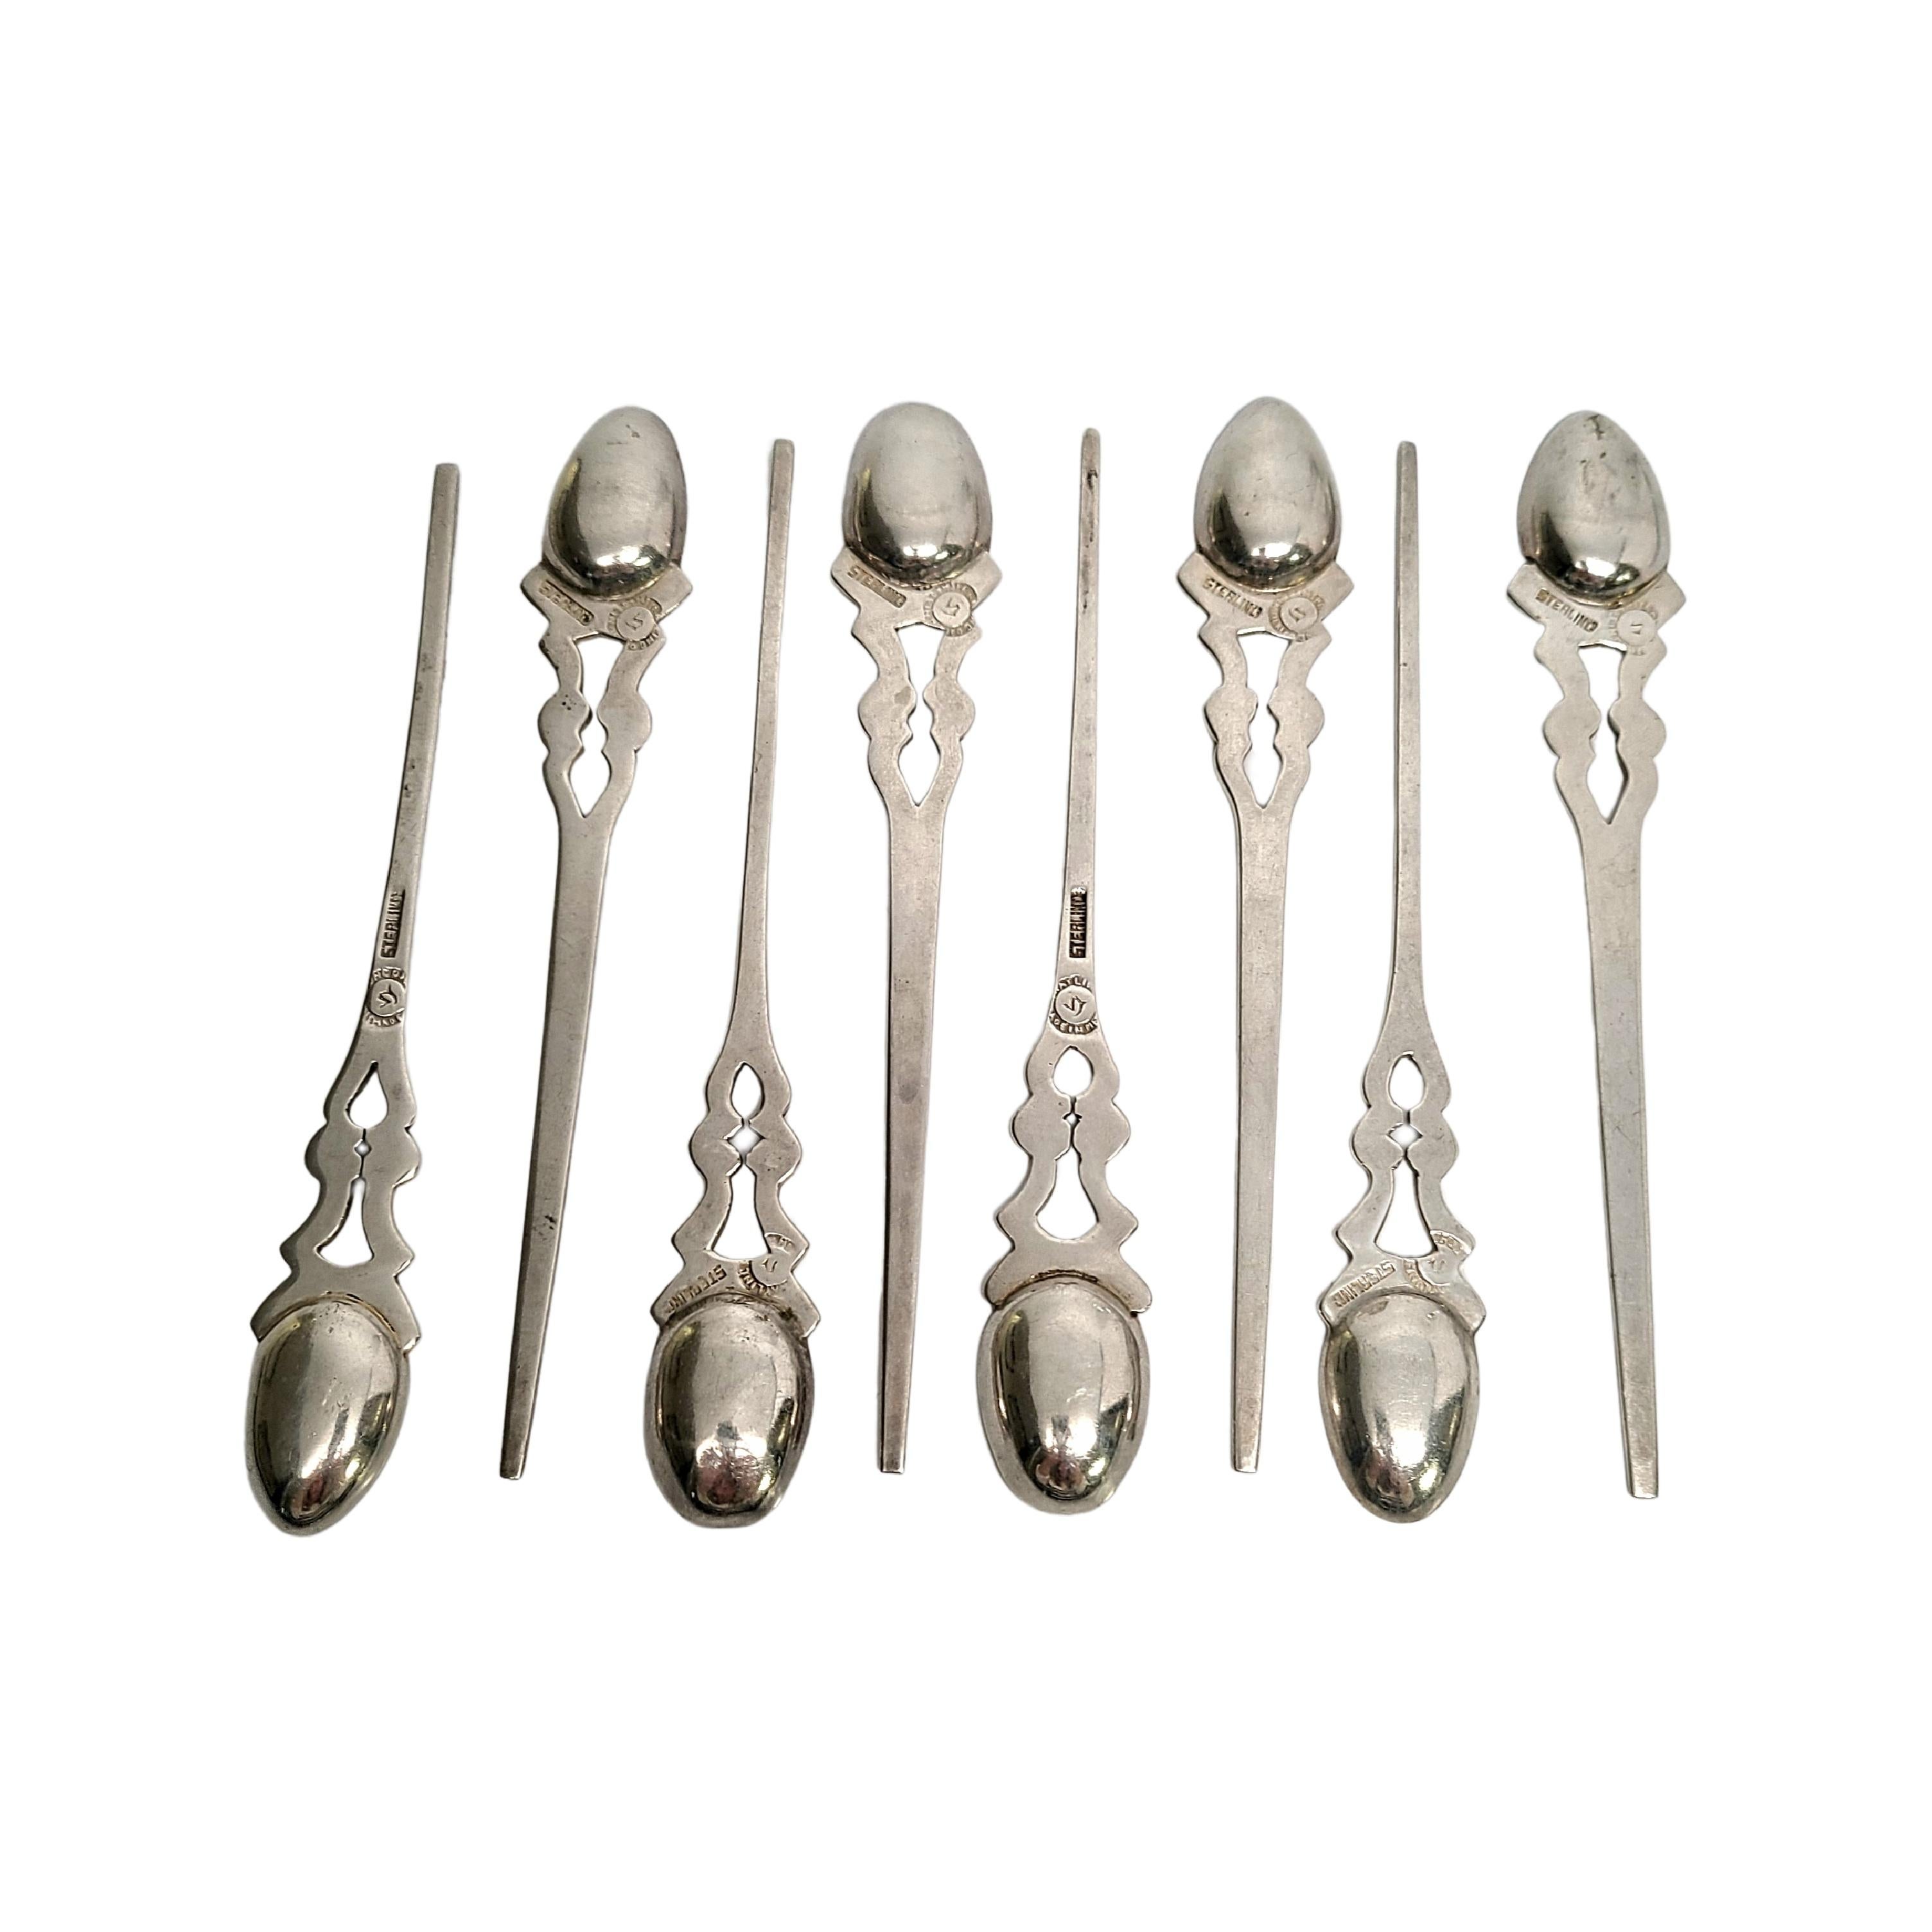 Set of 8 Taxco Mexico William Spratling sterling silver child's spoons.

Spoons feature small bowls but long handles with an openwork design and a slightly hammered finish in the bowls. Each spoon is slightly different due to being